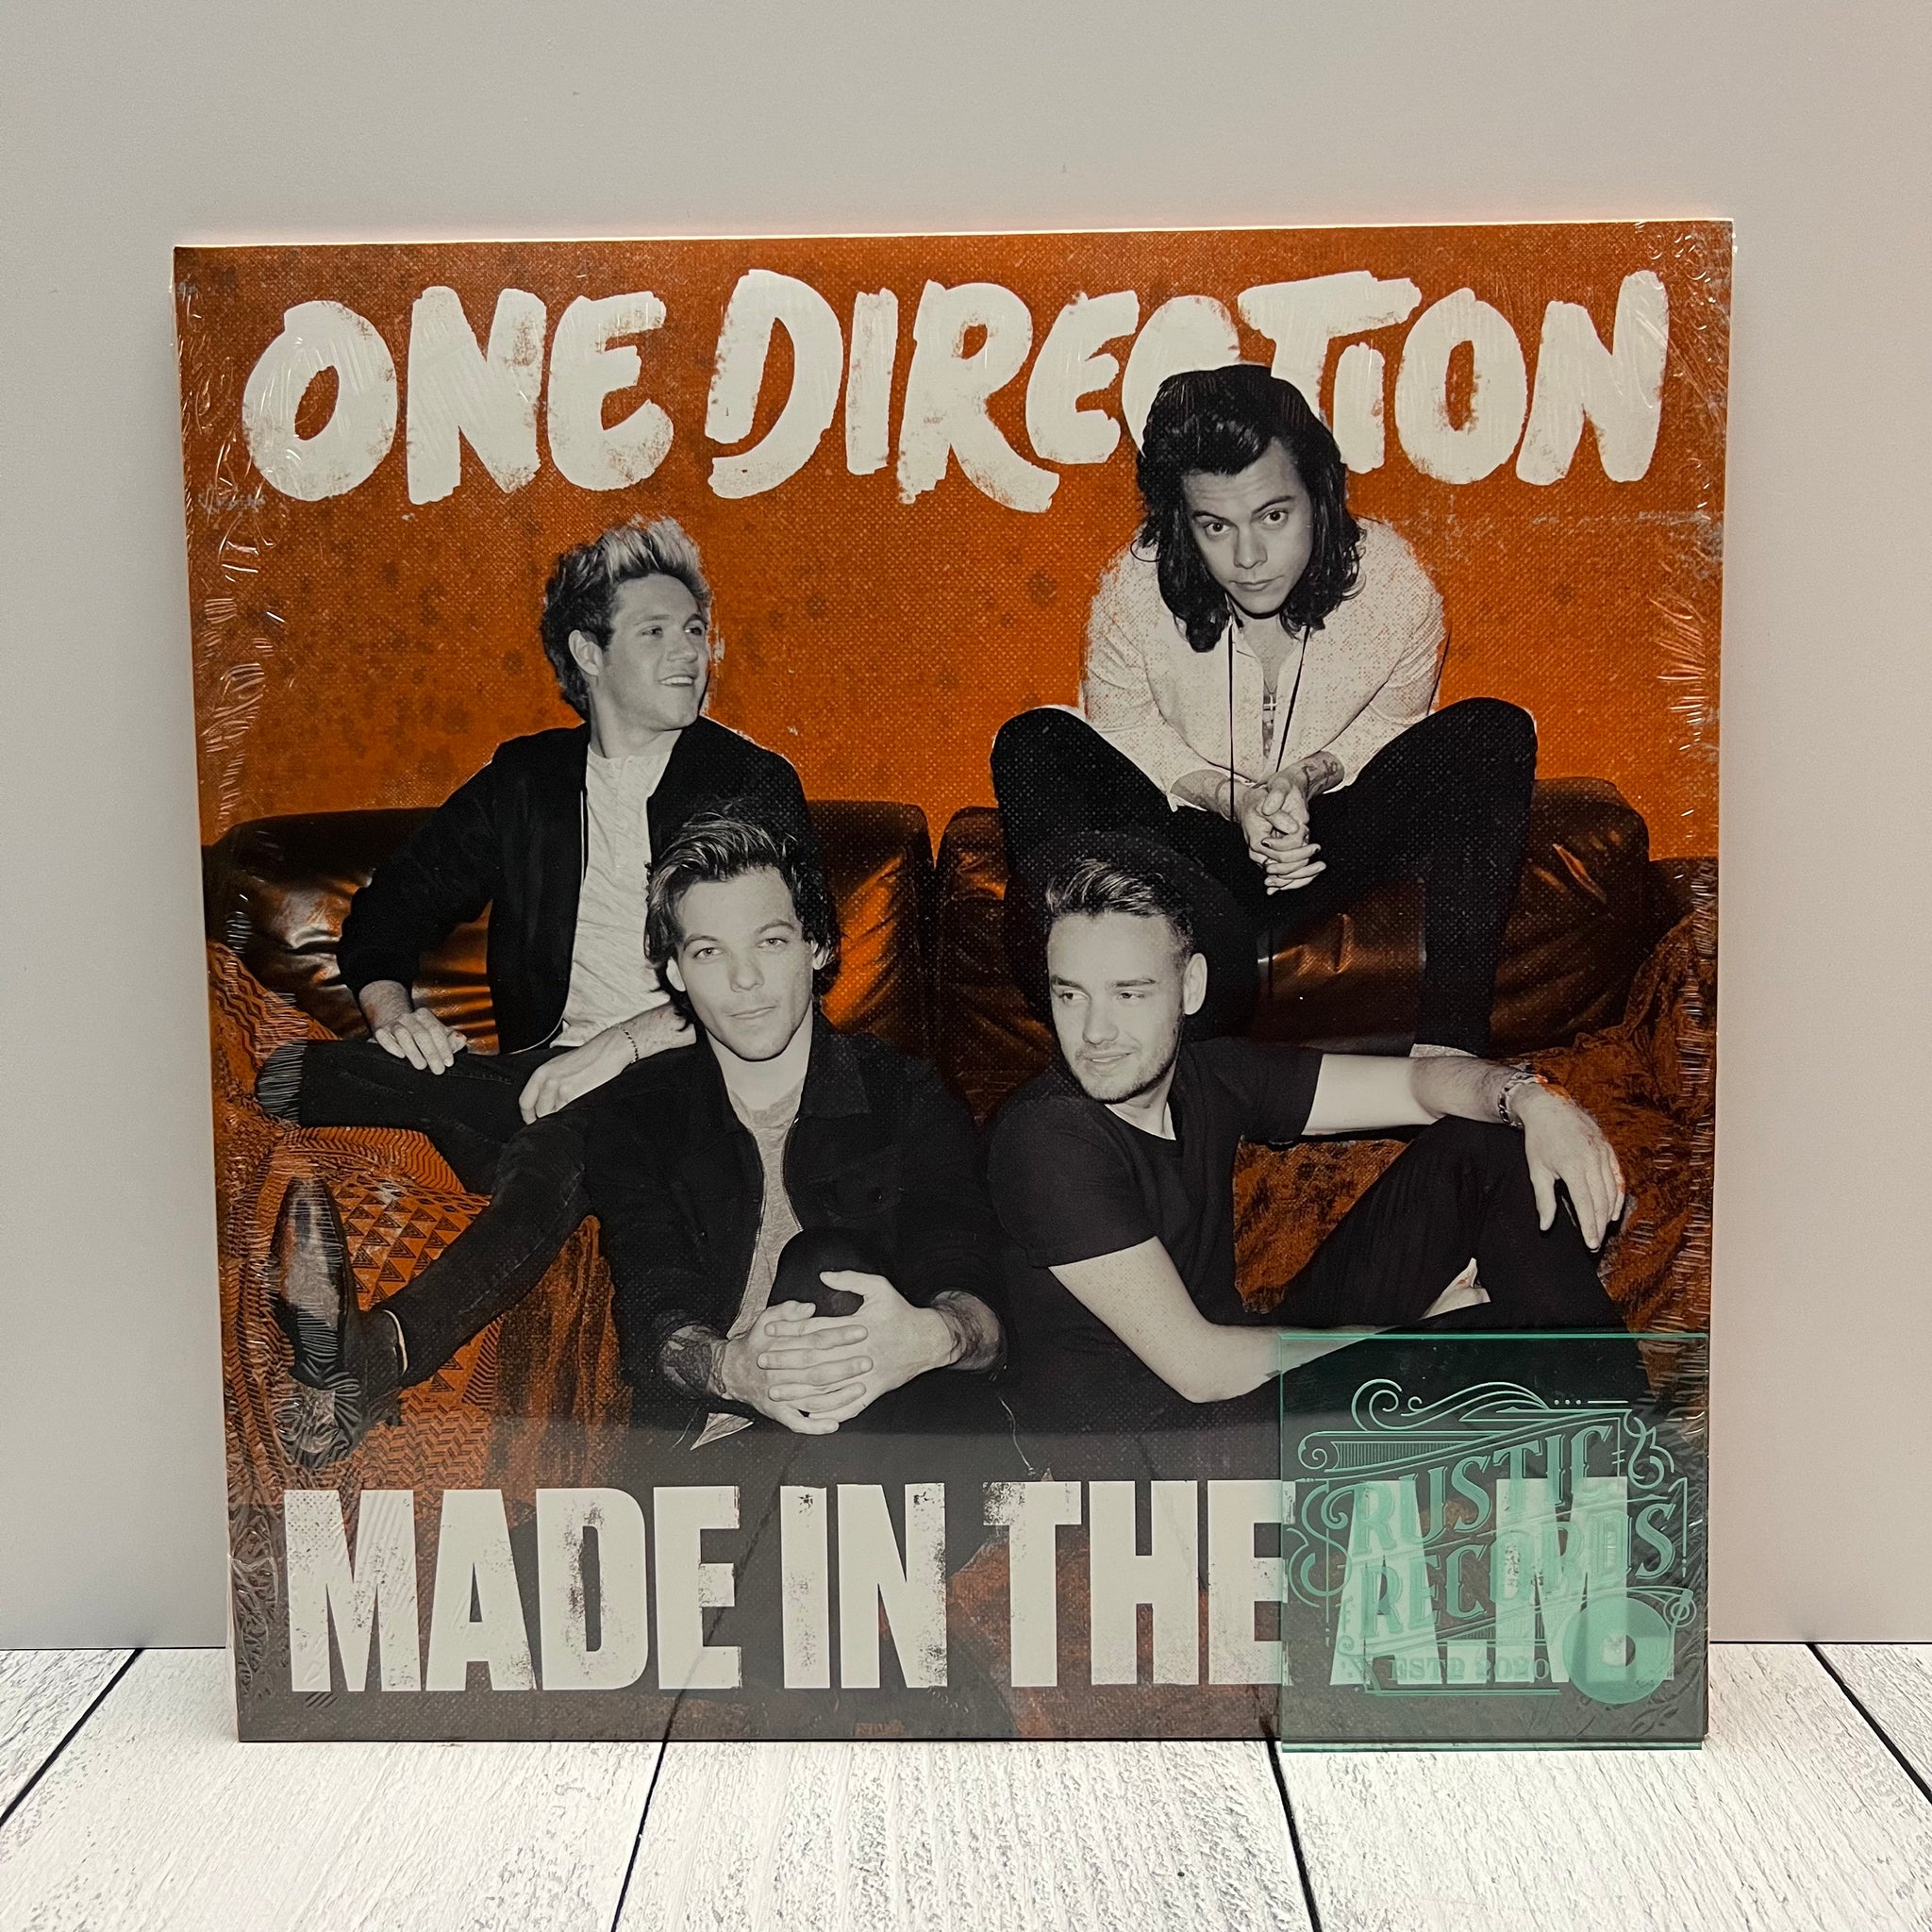 One Direction - Made In The A.M.